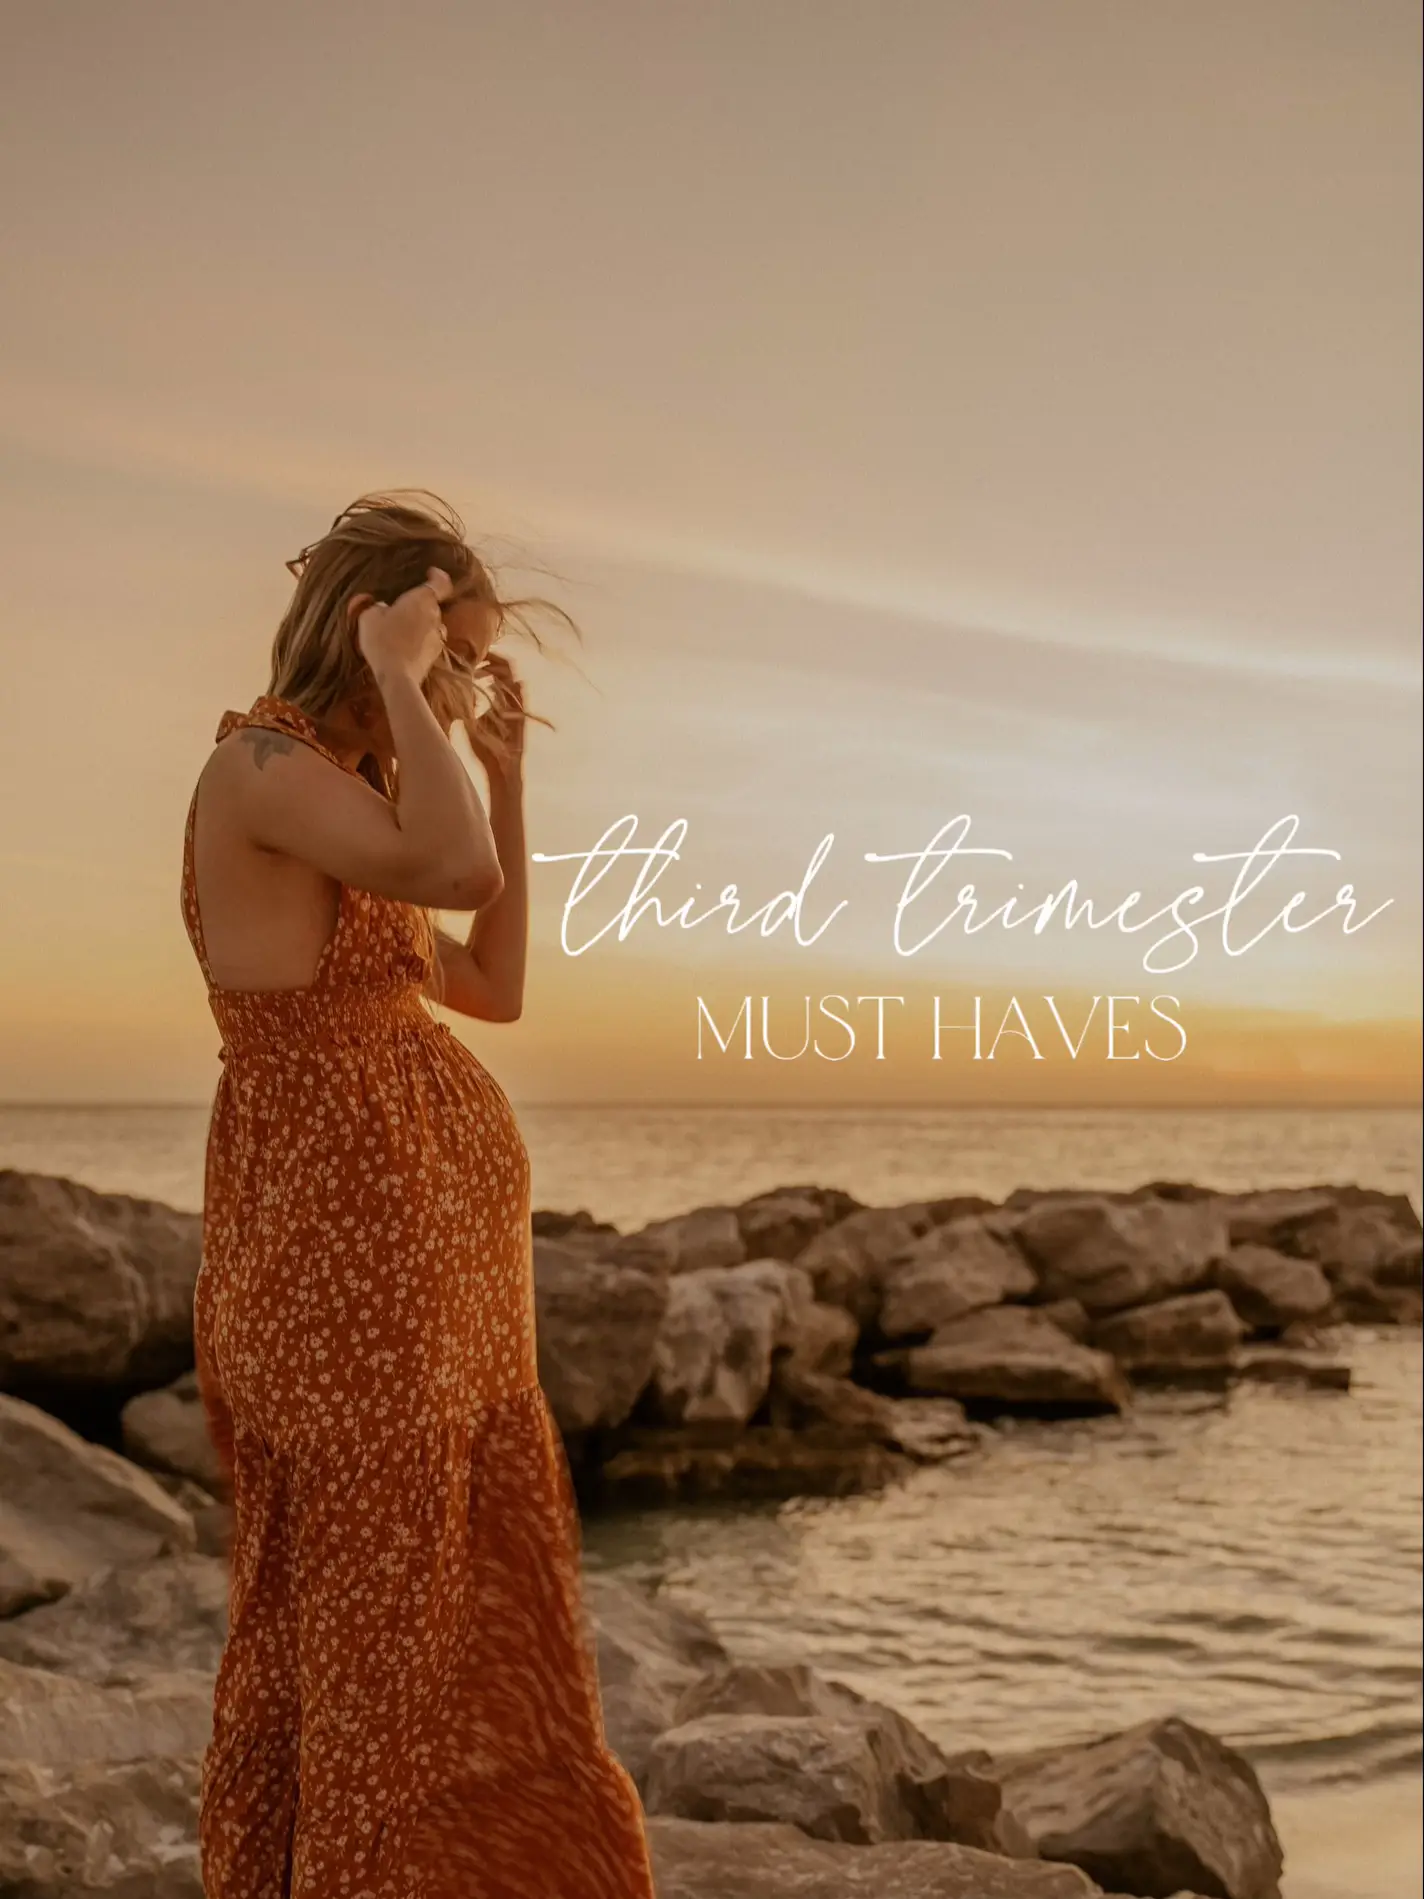 My 3rd trimester must haves !  Gallery posted by Catie shumaker